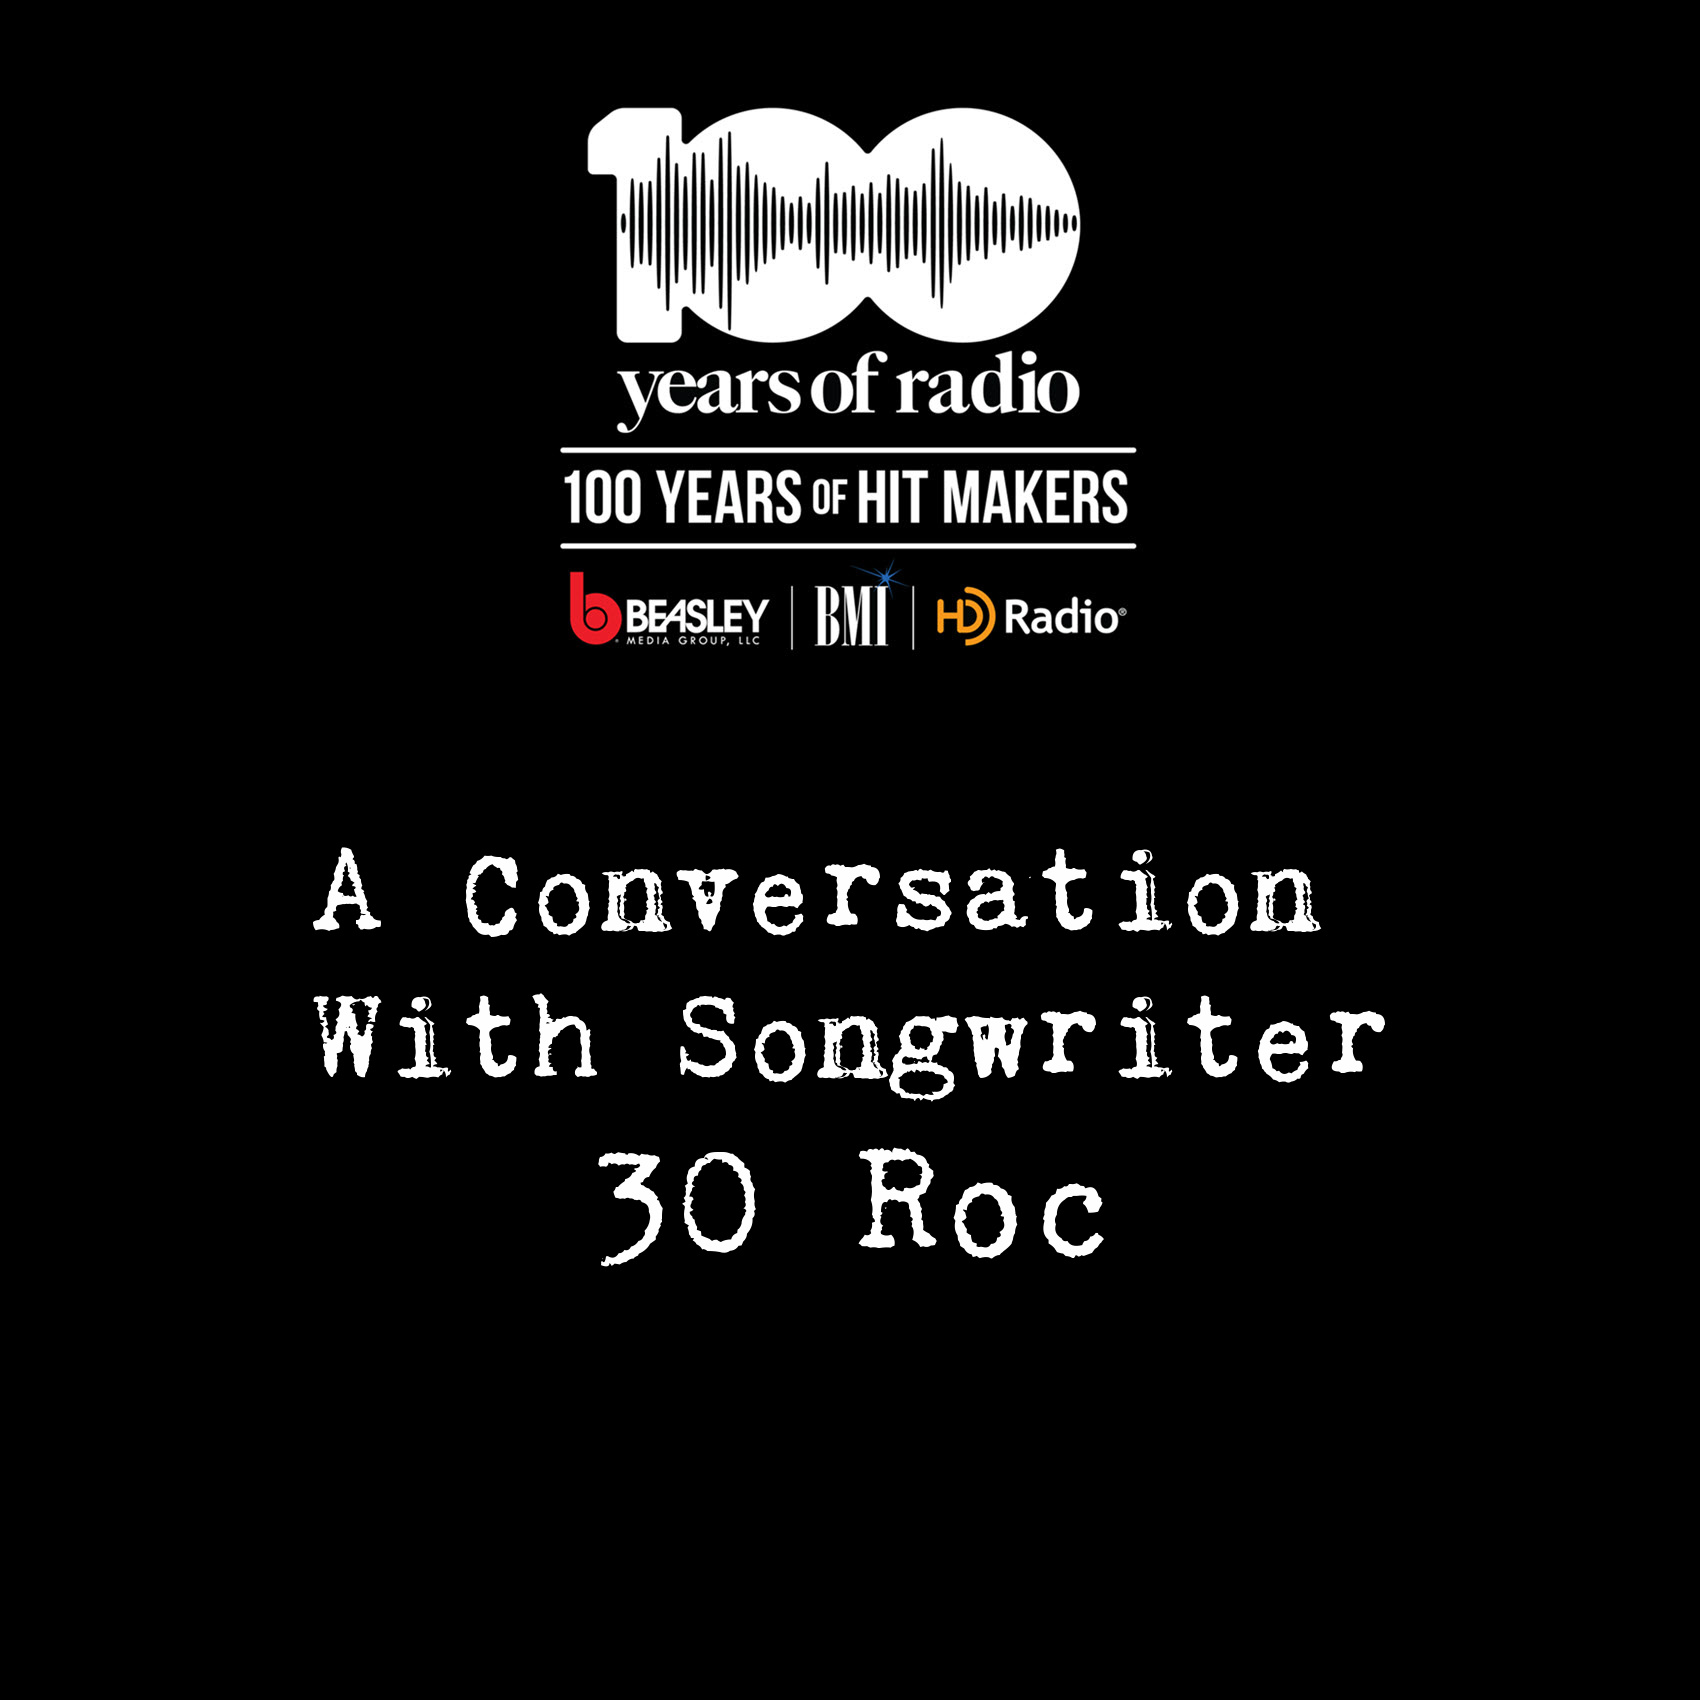 Interview with Songwriter 30 Roc